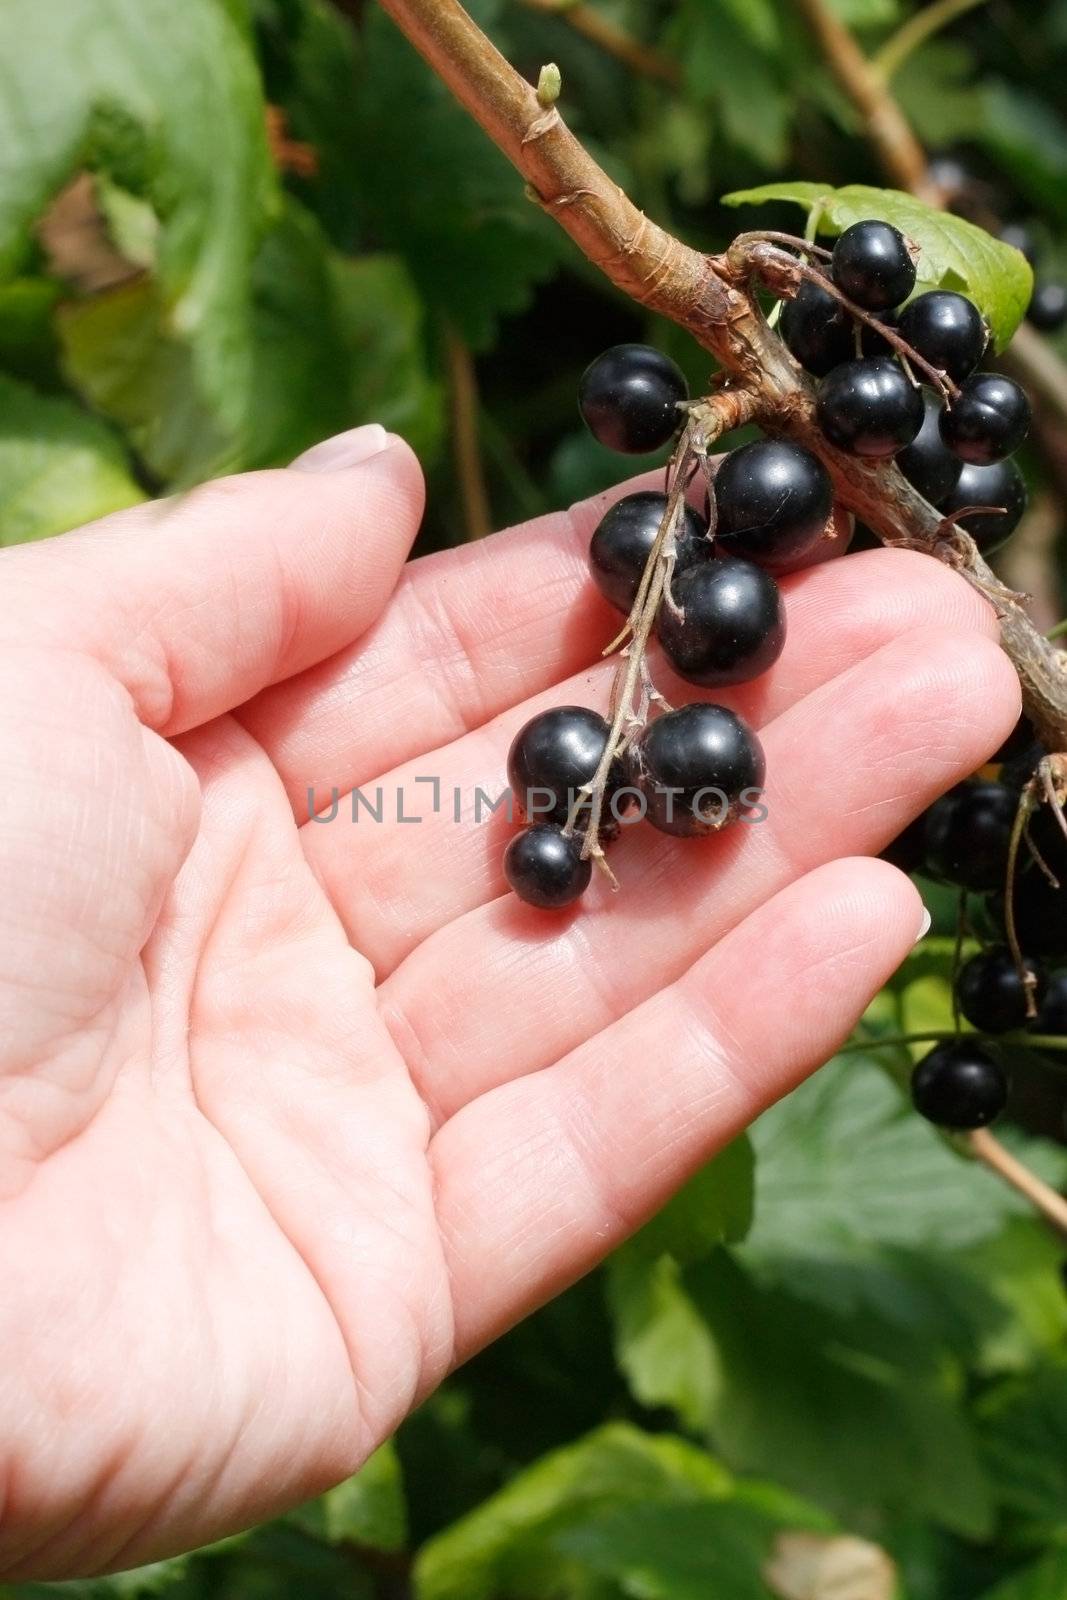 A hand holding some blackcurrants